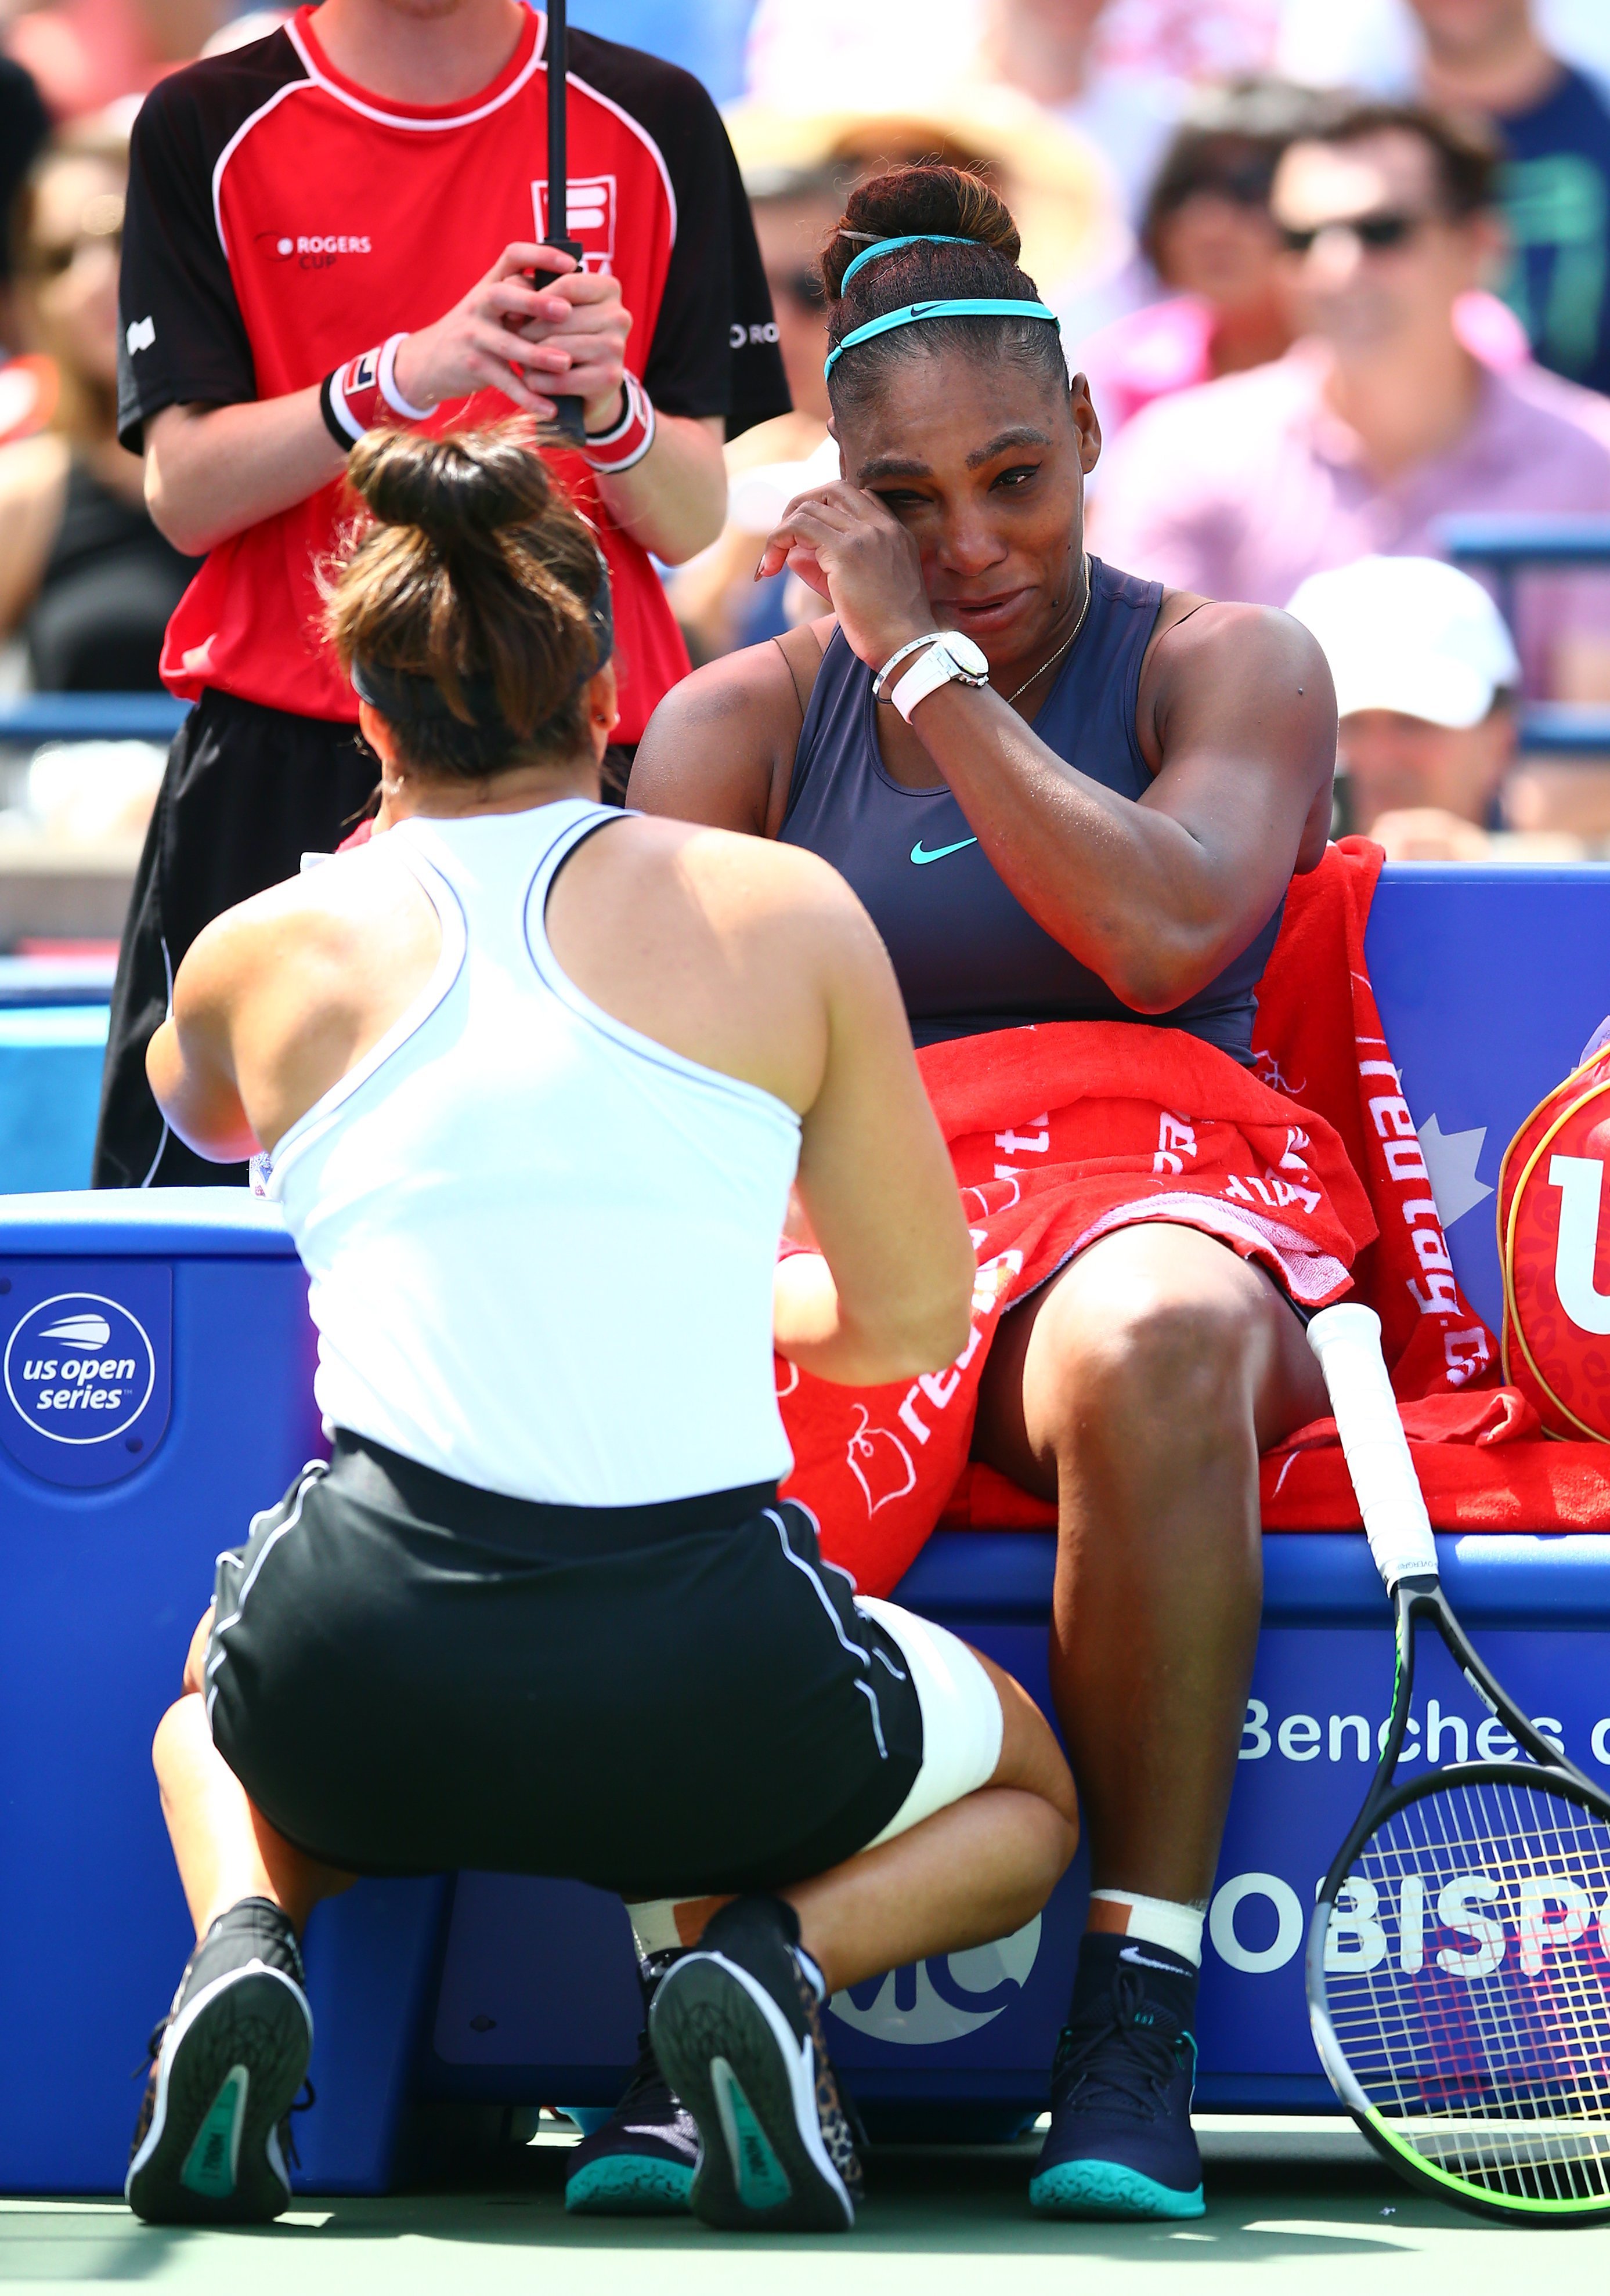 Serena Williams speaks with Bianca Andreescu following her withdrawal from the final match due to a back injury on Day 9 of the Rogers Cup on Aug. 11, 2019 in Toronto, Canada. |Photo: Getty Images